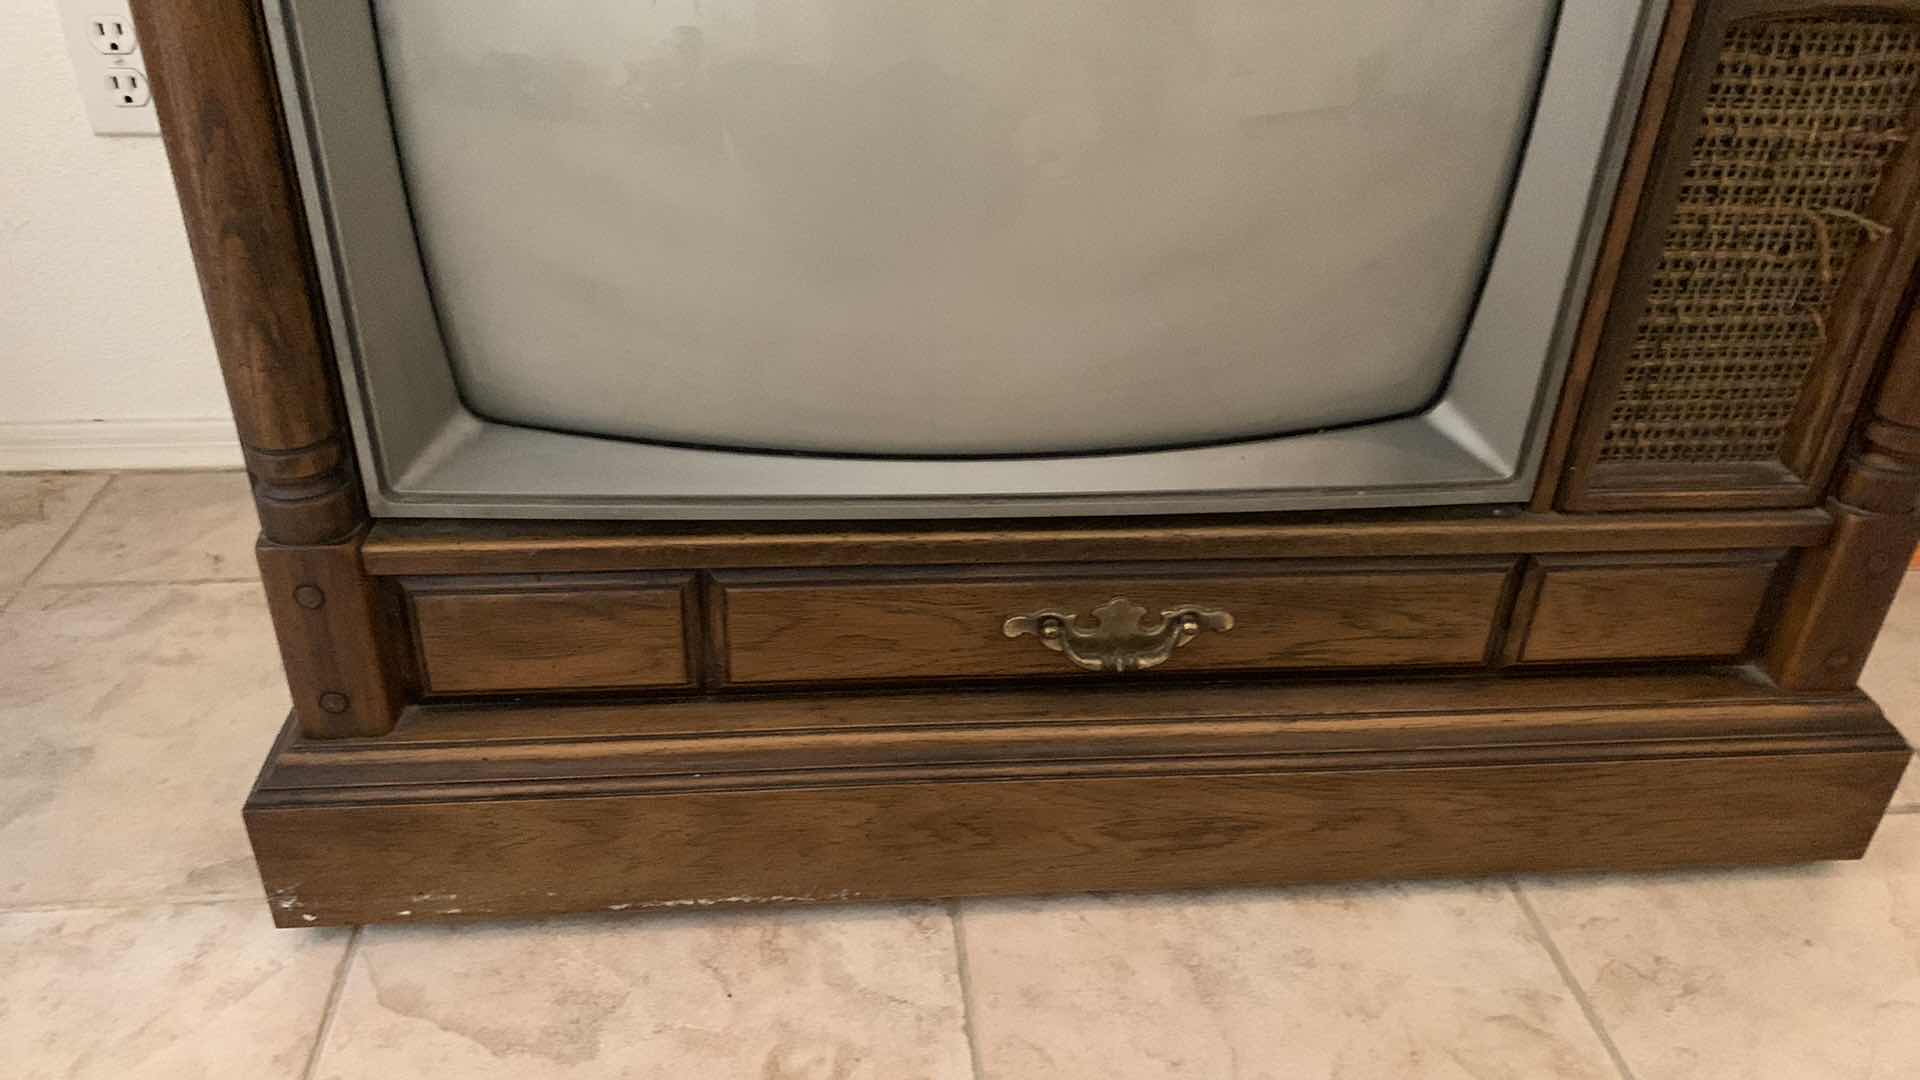 Photo 4 of VINTAGE  MAGNAVOX TELEVISION IN WOOD CABINET  37” x 19” x H30”